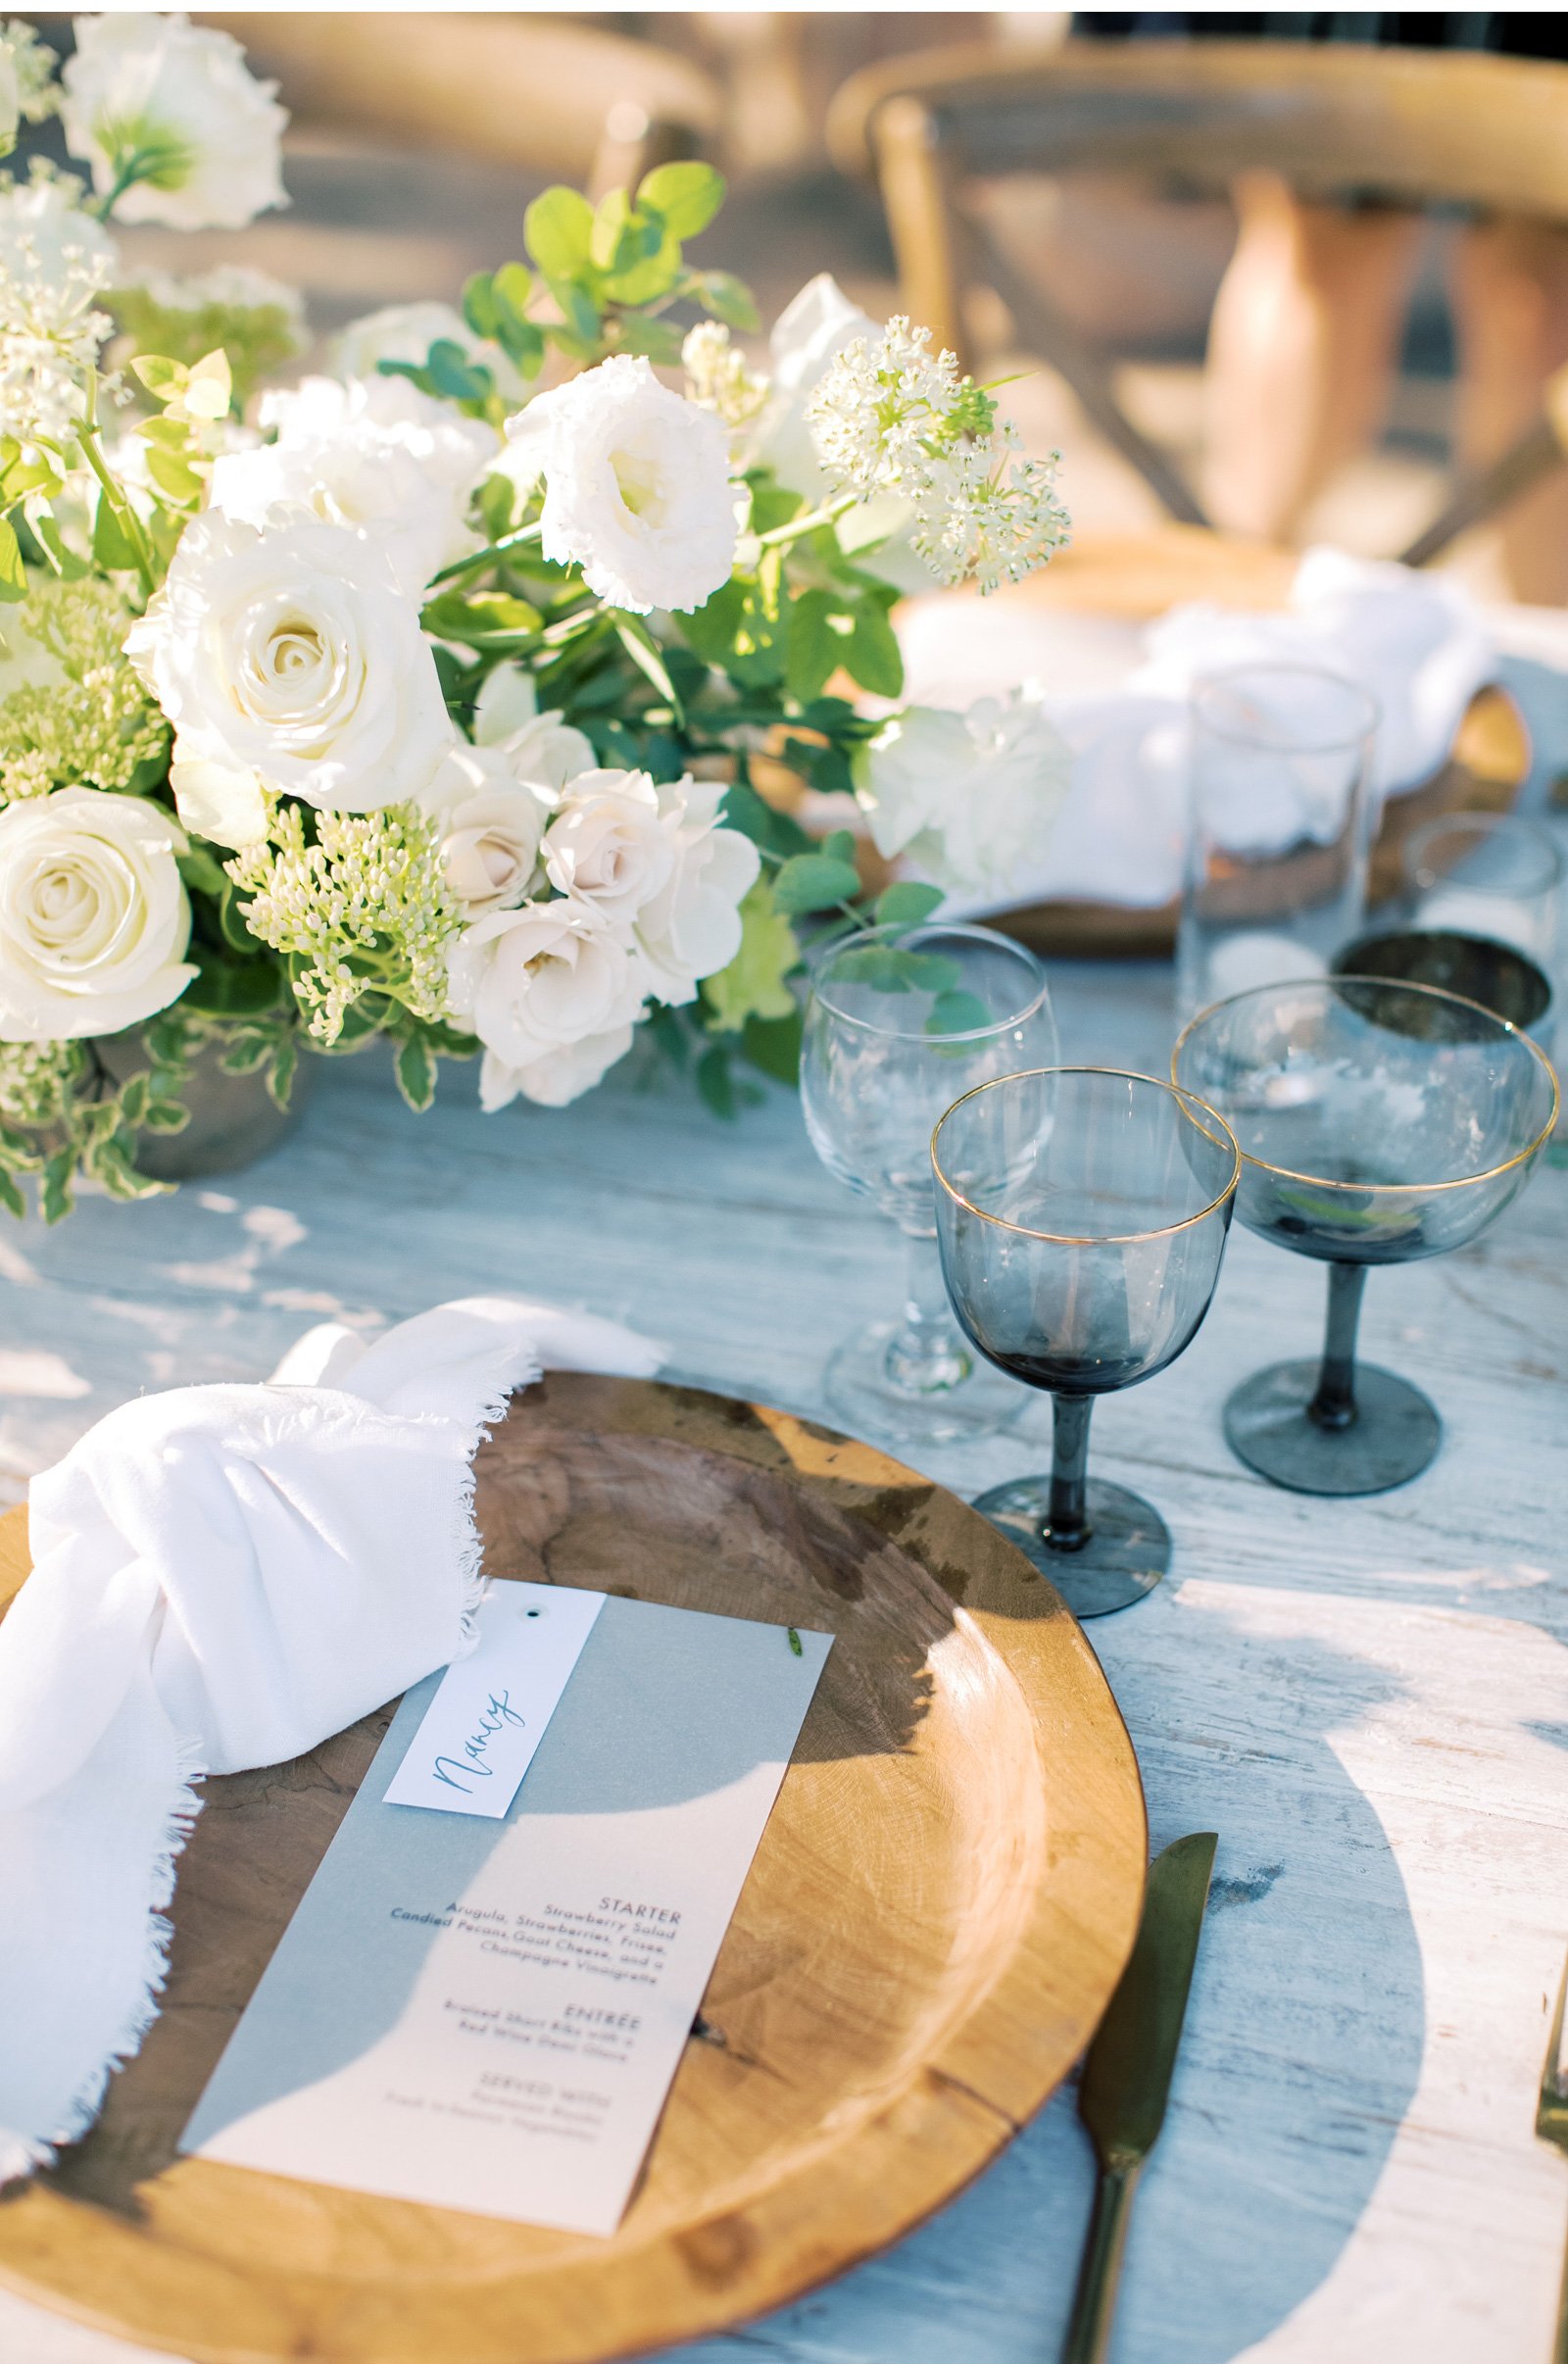 Al-Fresco-Southern-California-Weddings-Light-and-Airy-Photography-Wedding-Photographer-High-End-Wedding-Inspiration-Clean-Event-Photography_08.jpg